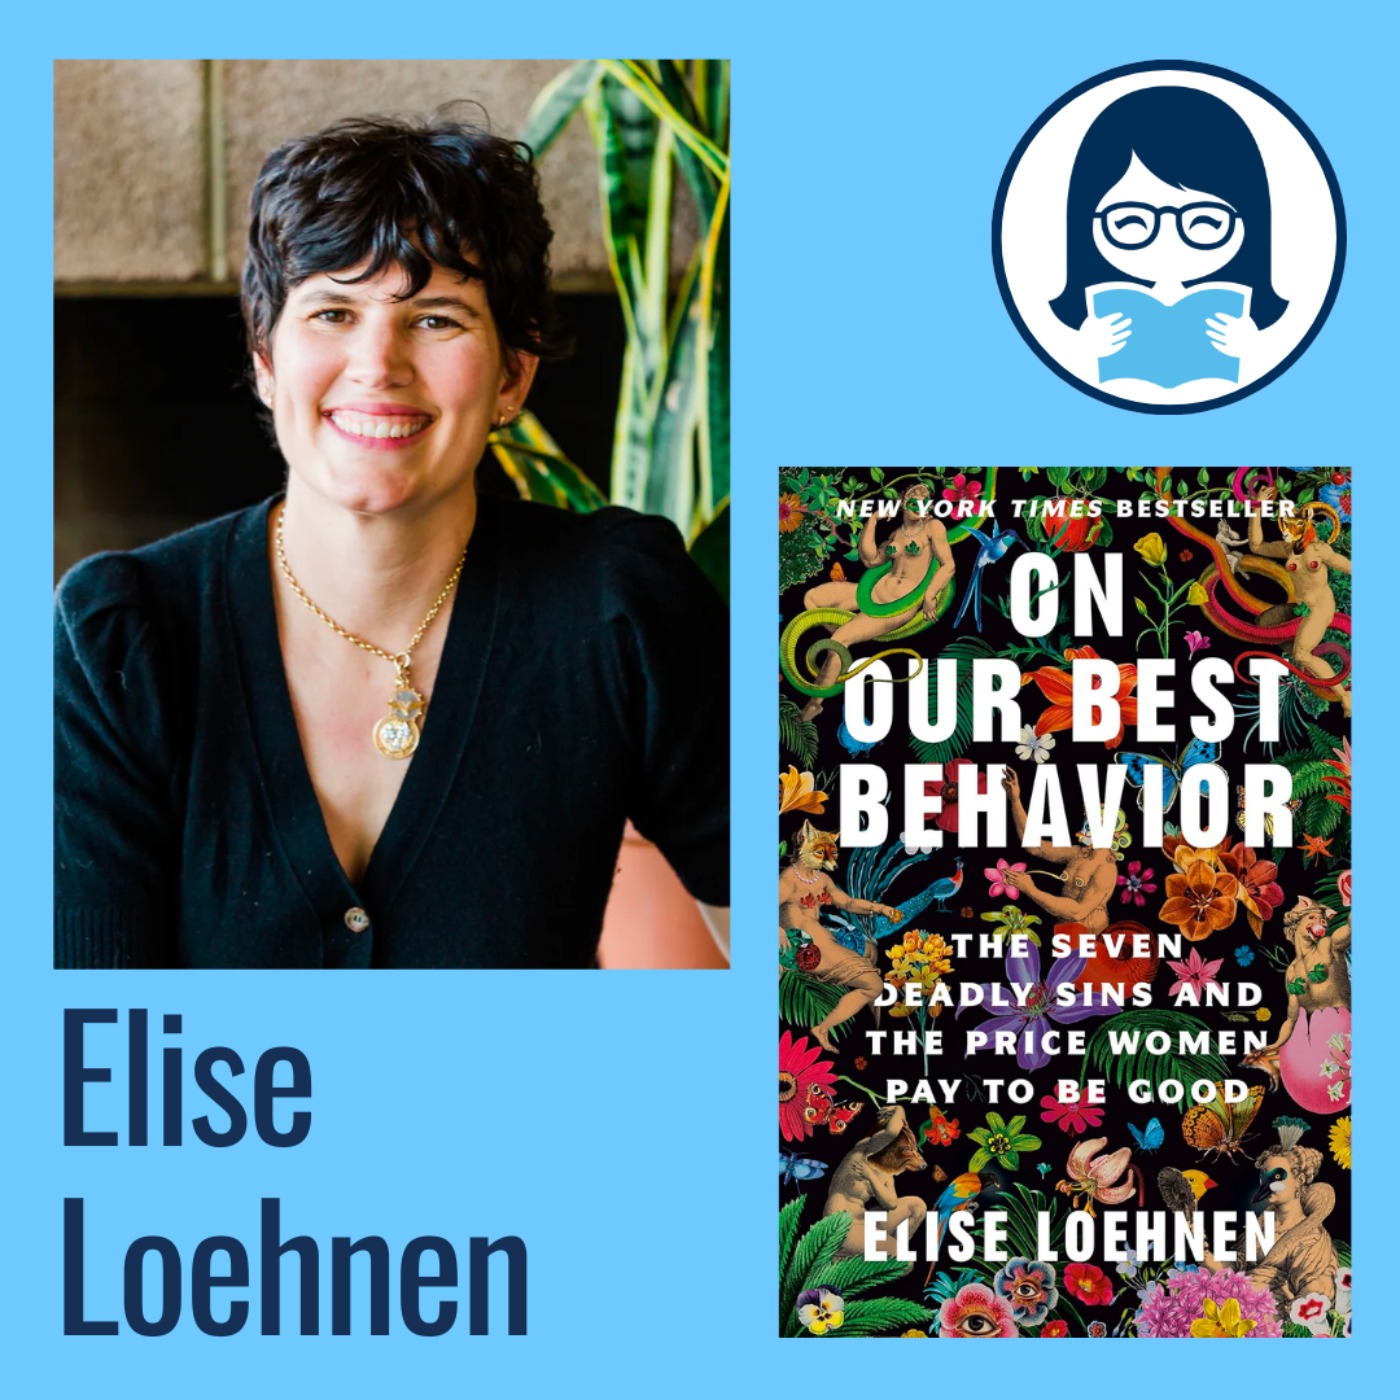 Elise Loehnen, ON OUR BEST BEHAVIOR: The Seven Deadly Sins and the Price Women Pay to Be Good